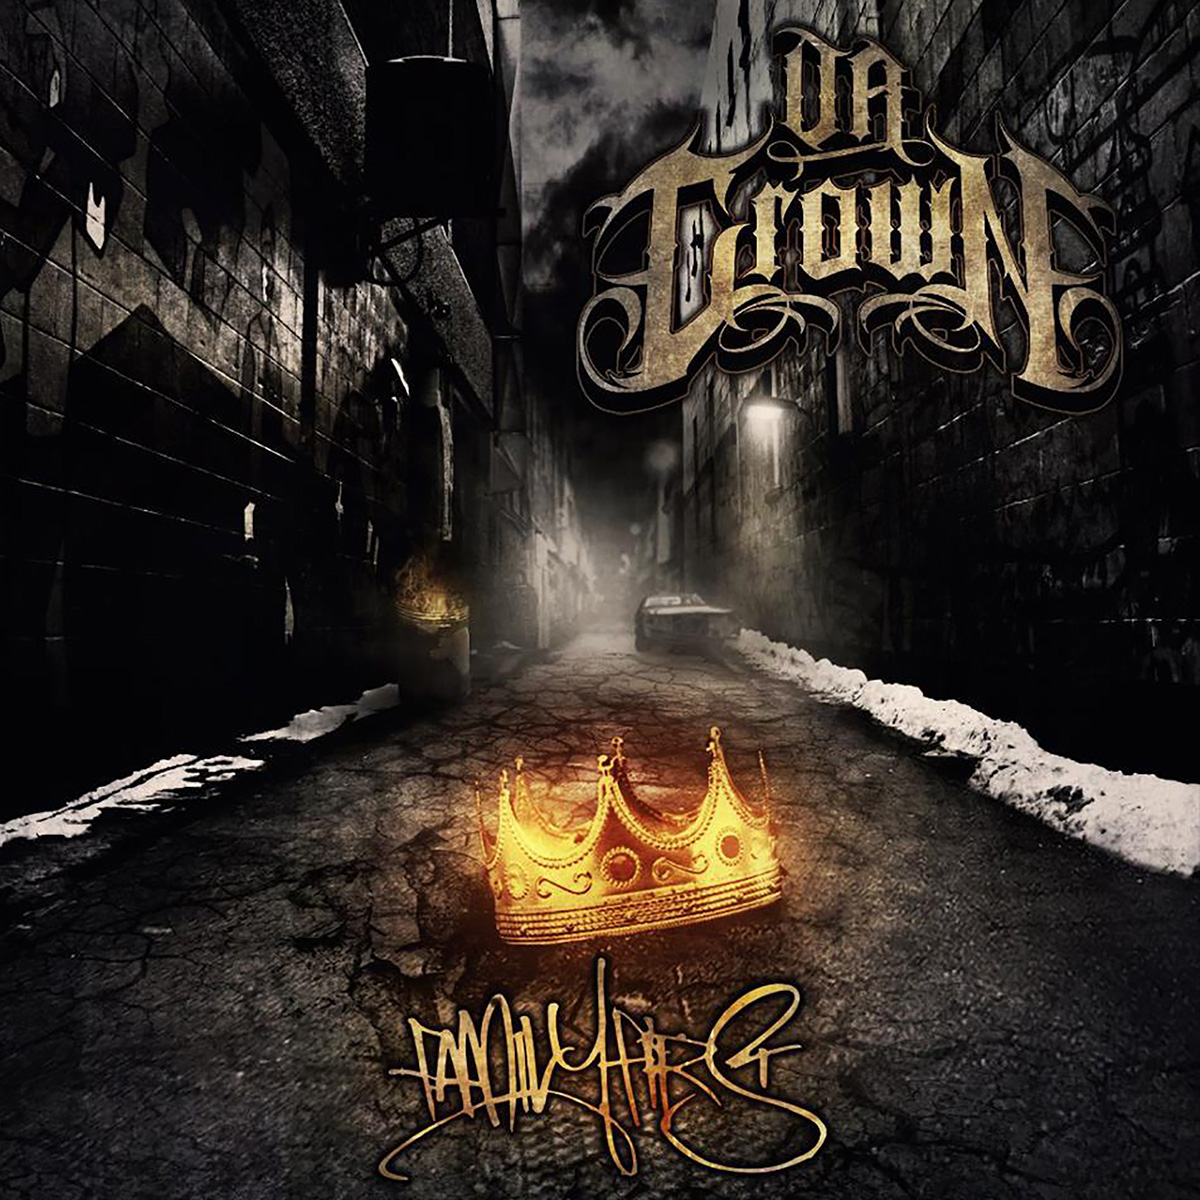 Da Crown - Family First - Available Worldwide November 26th 2013